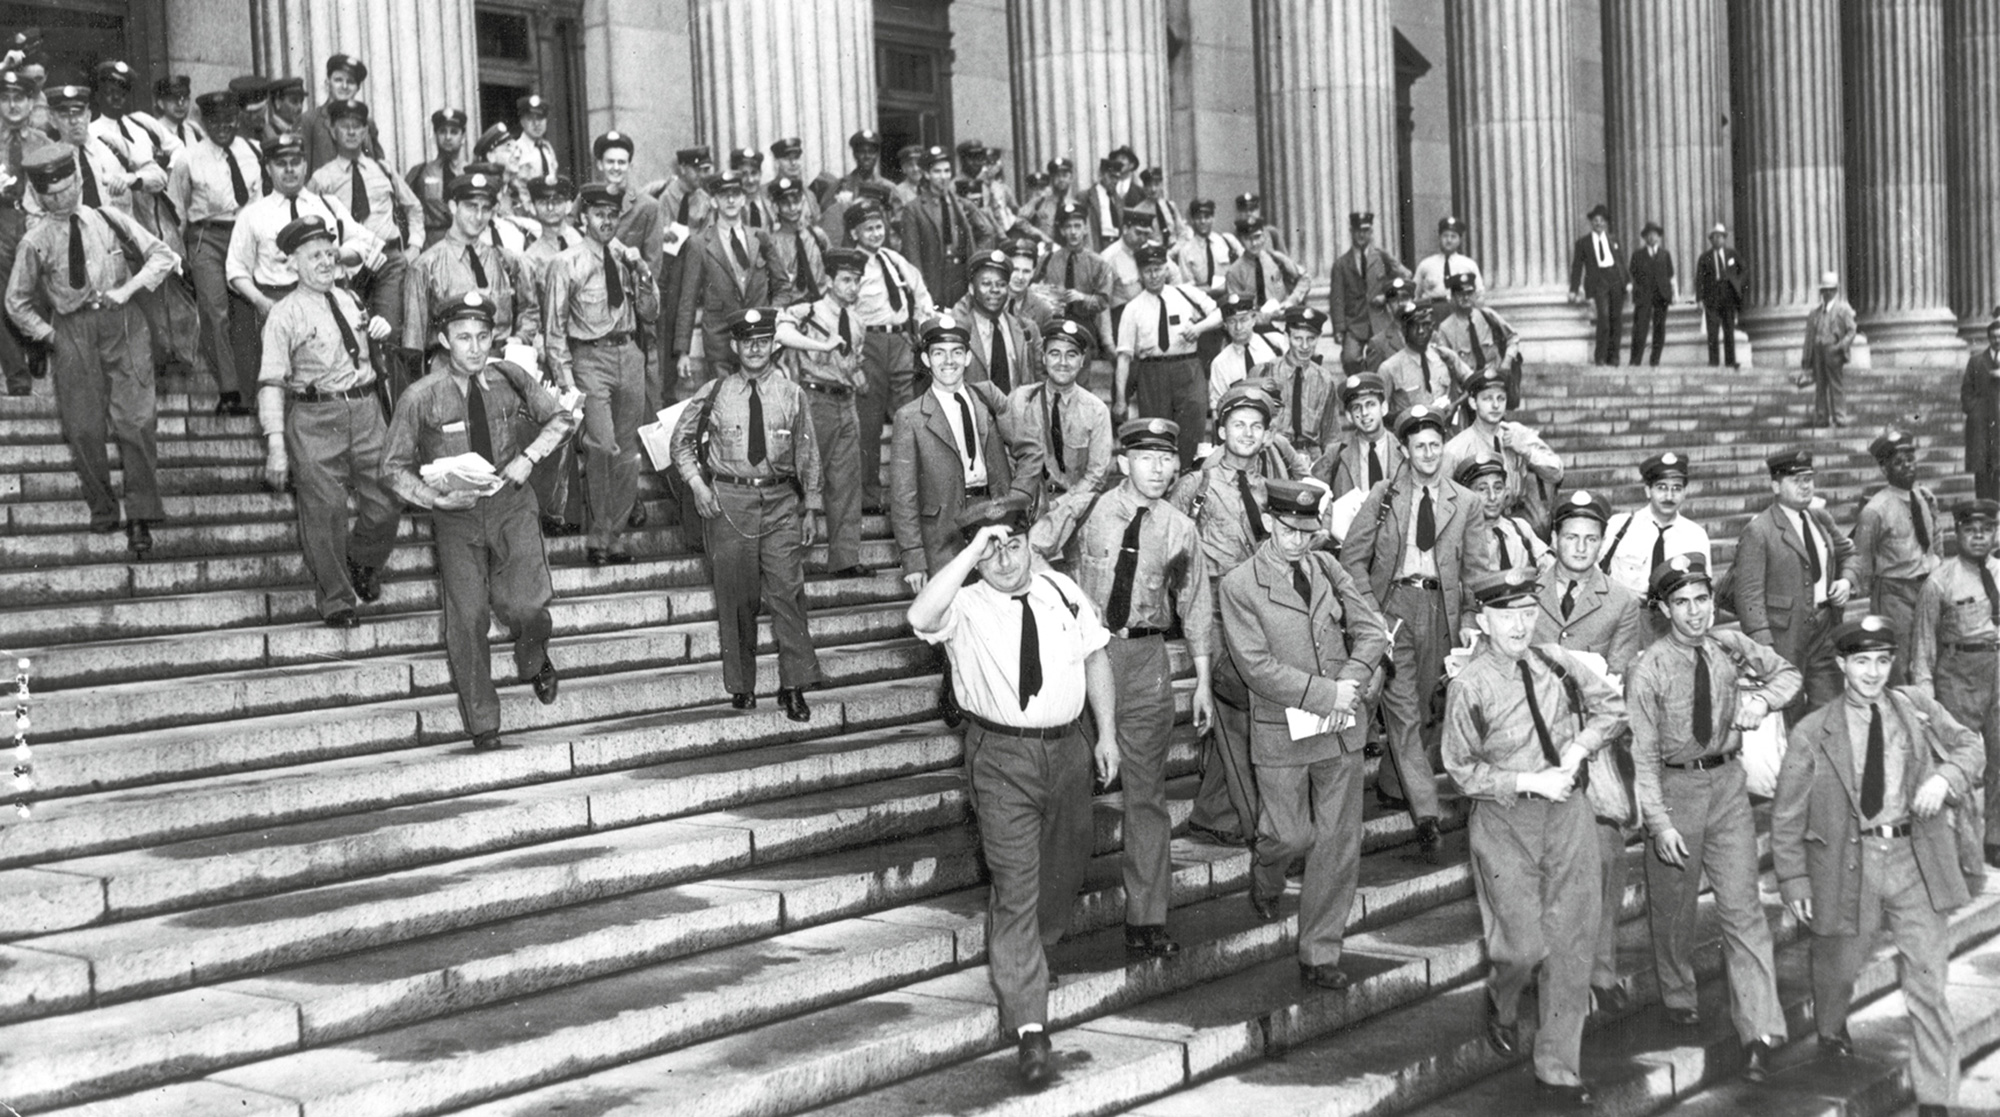 Letter carriers heading out on their rounds from New York City’s main post office, 15 June 1936. All images courtesy Smithsonian Institution.